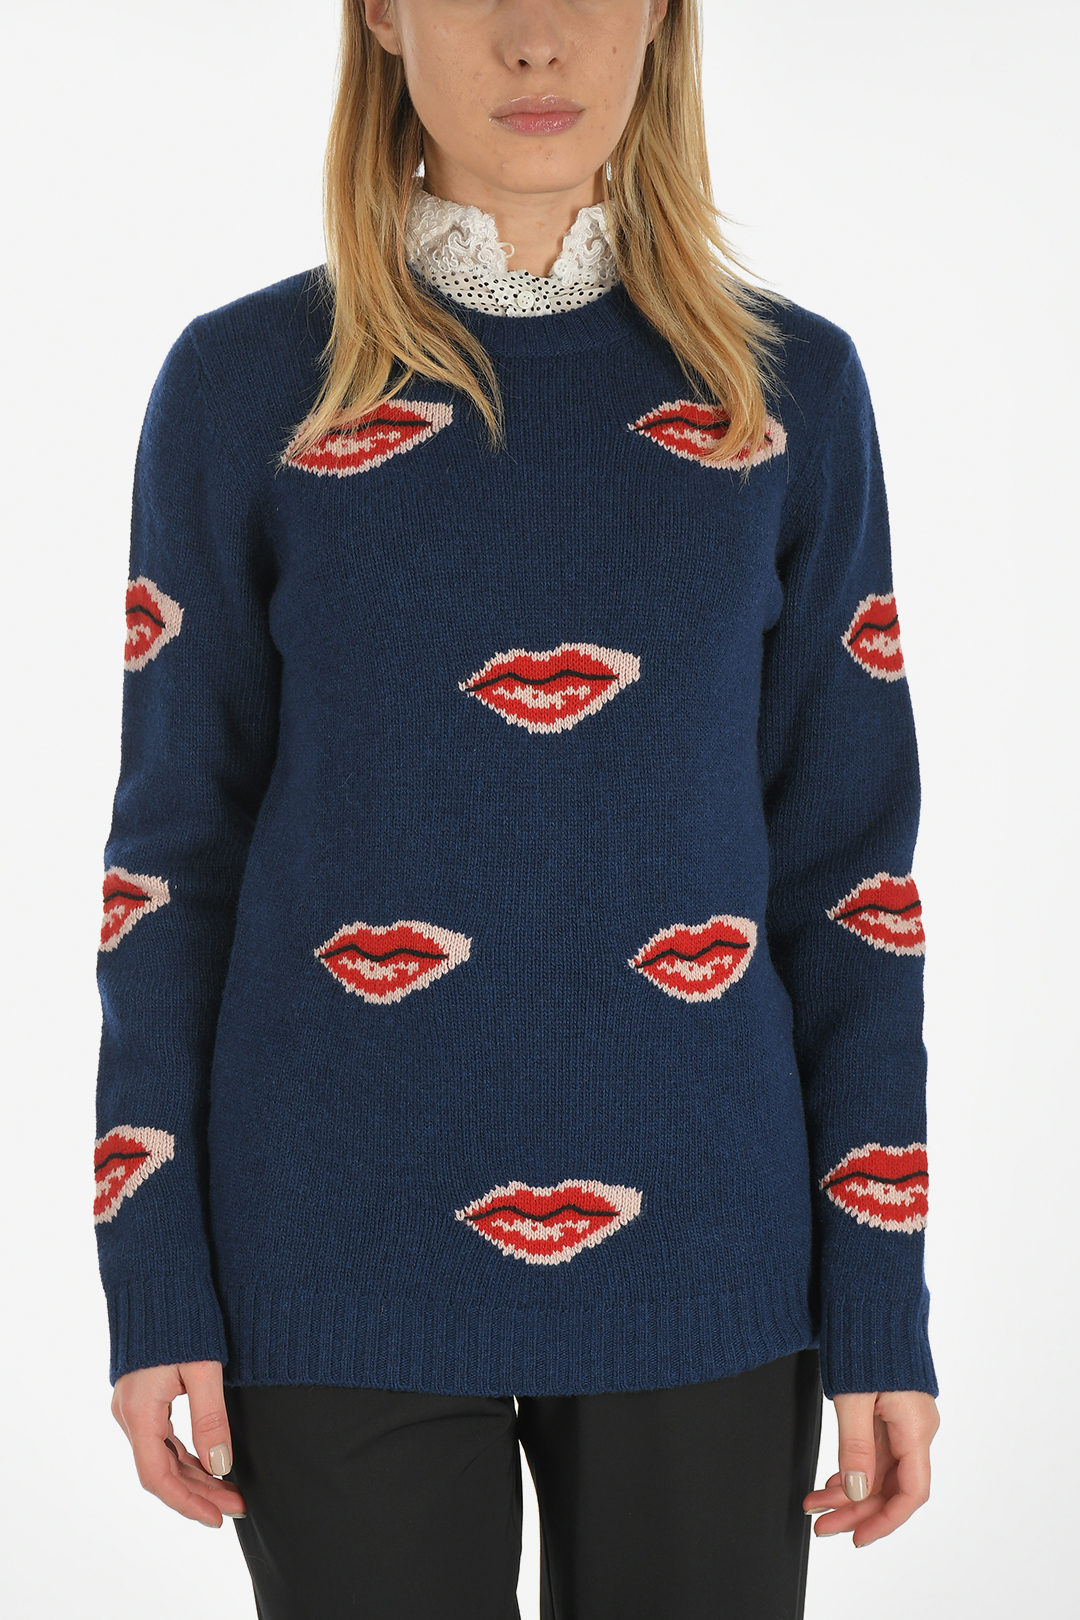 Prada Virgin Wool and Cashmere Sweater with Lips Embroidery women - Glamood  Outlet